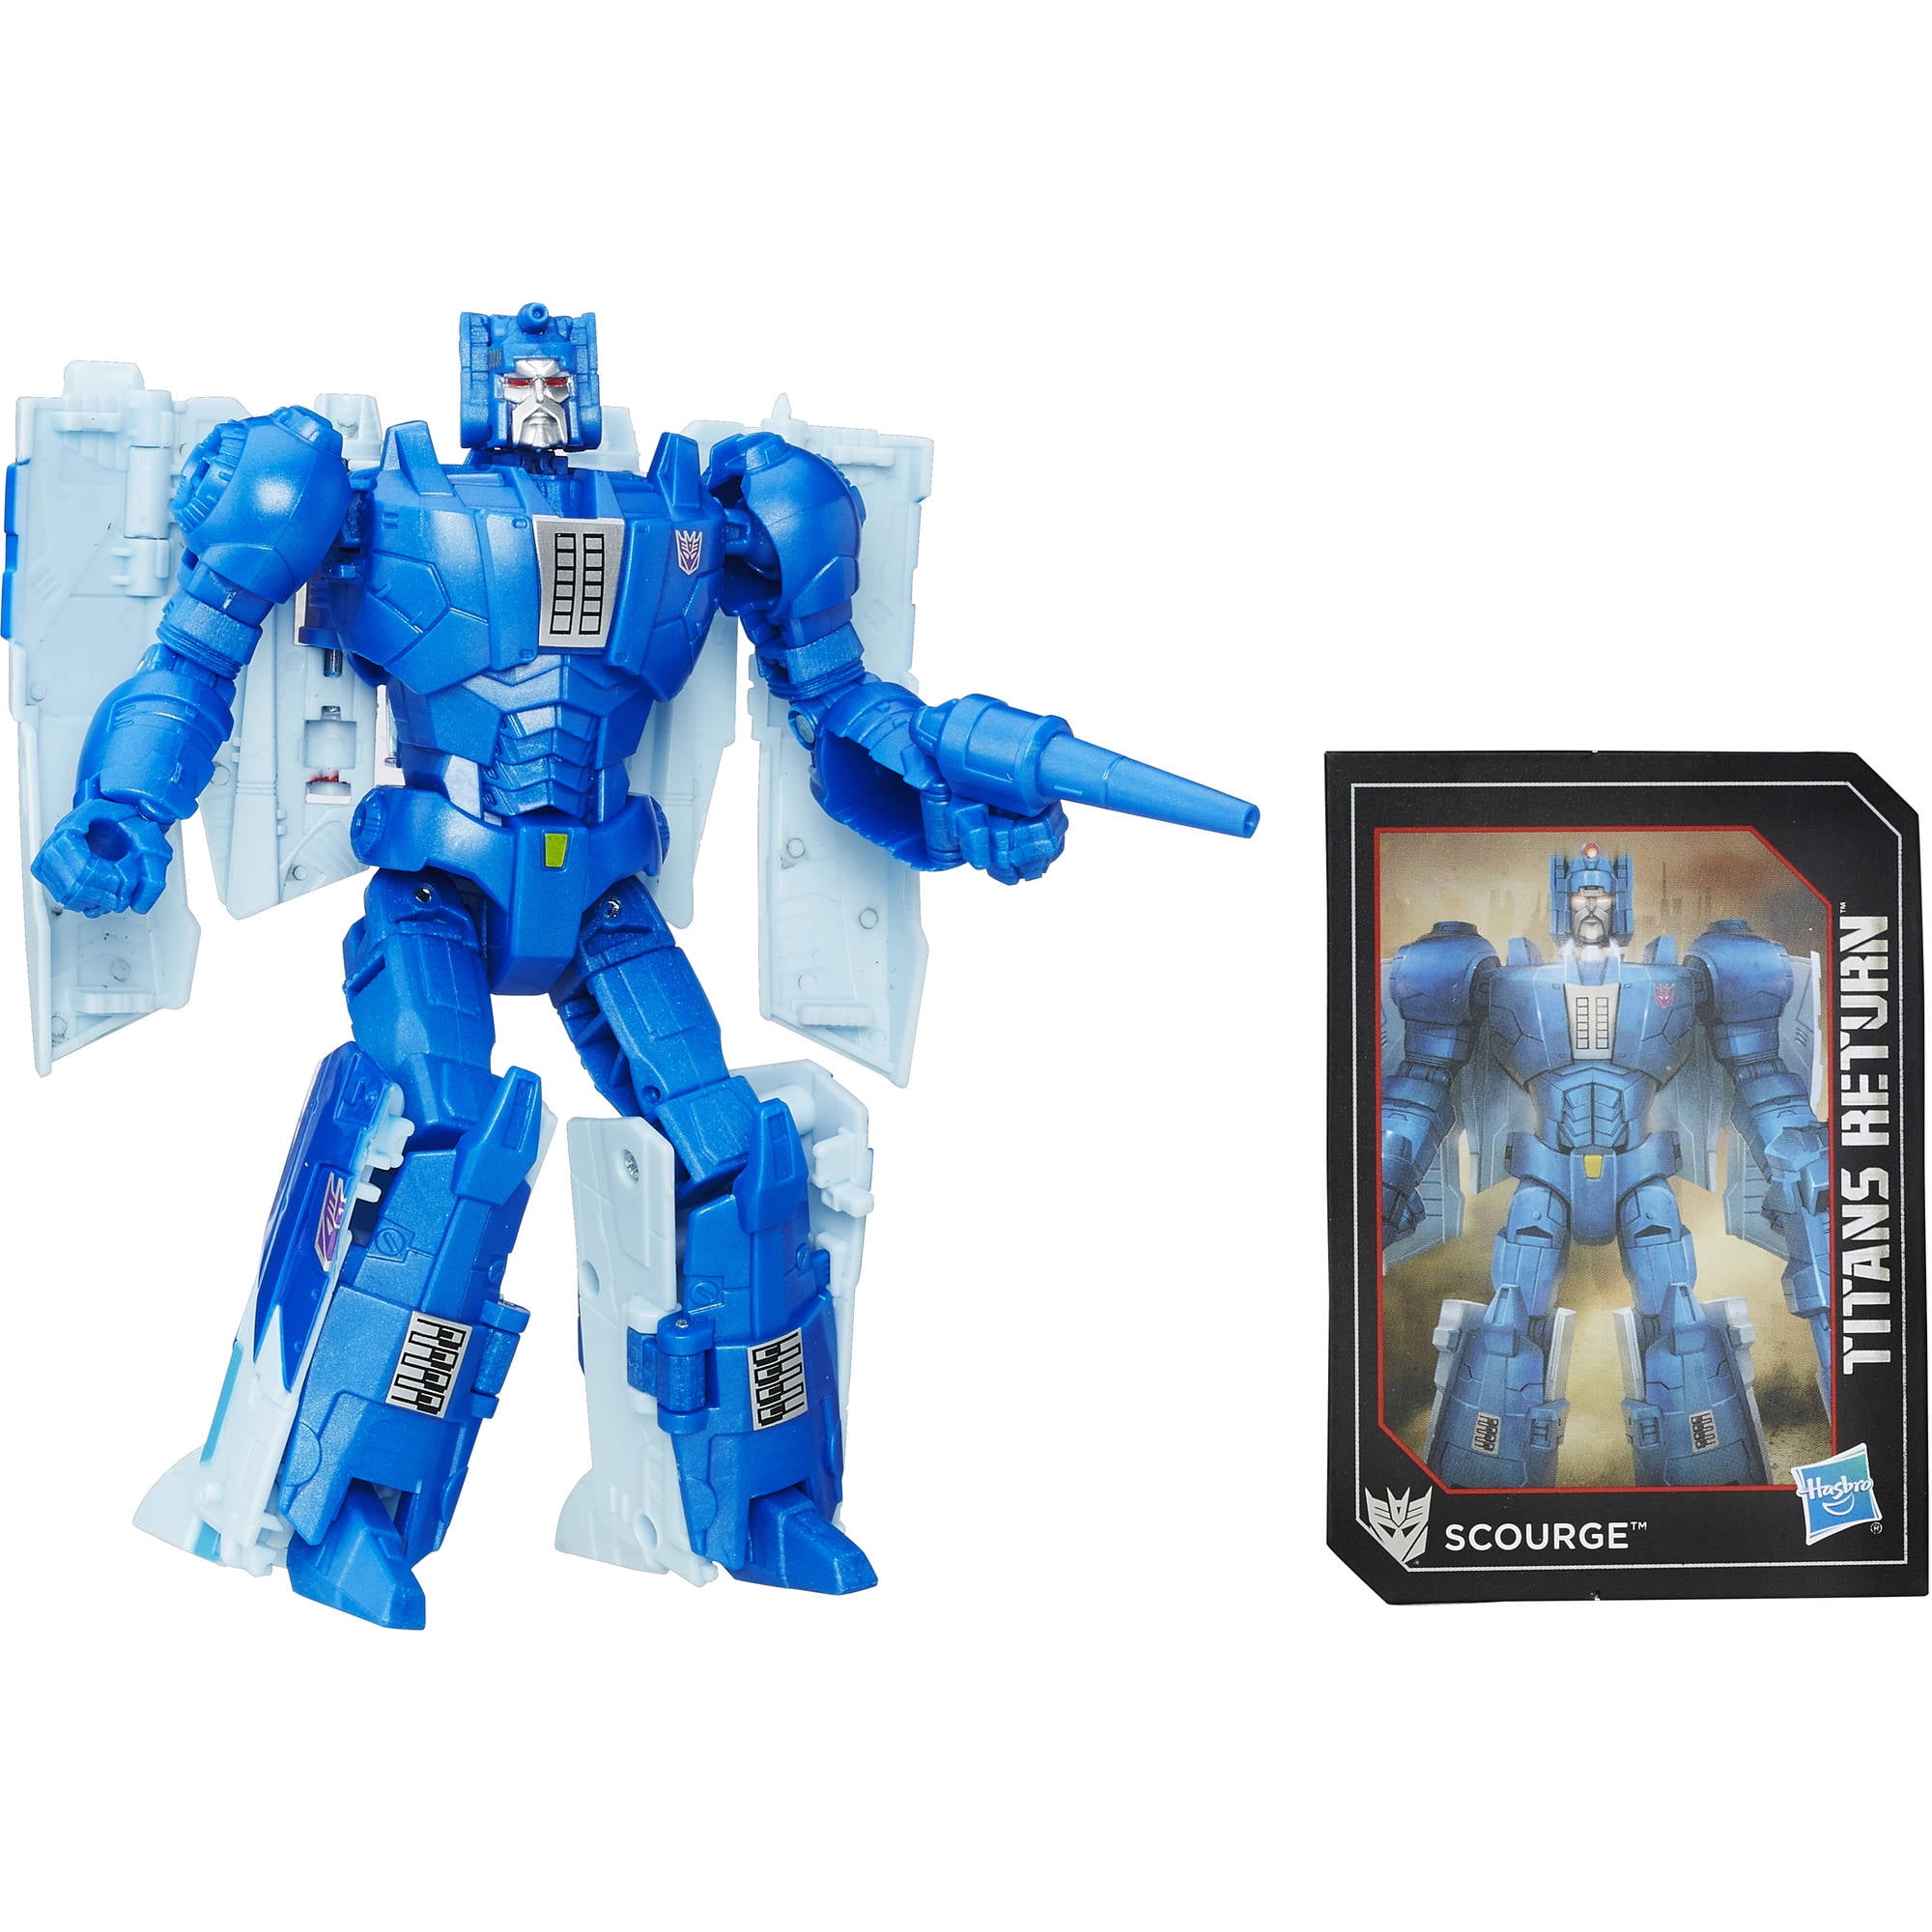 Transformers Generations Titans Return Legends Class Gnaw Action Figure Toy 